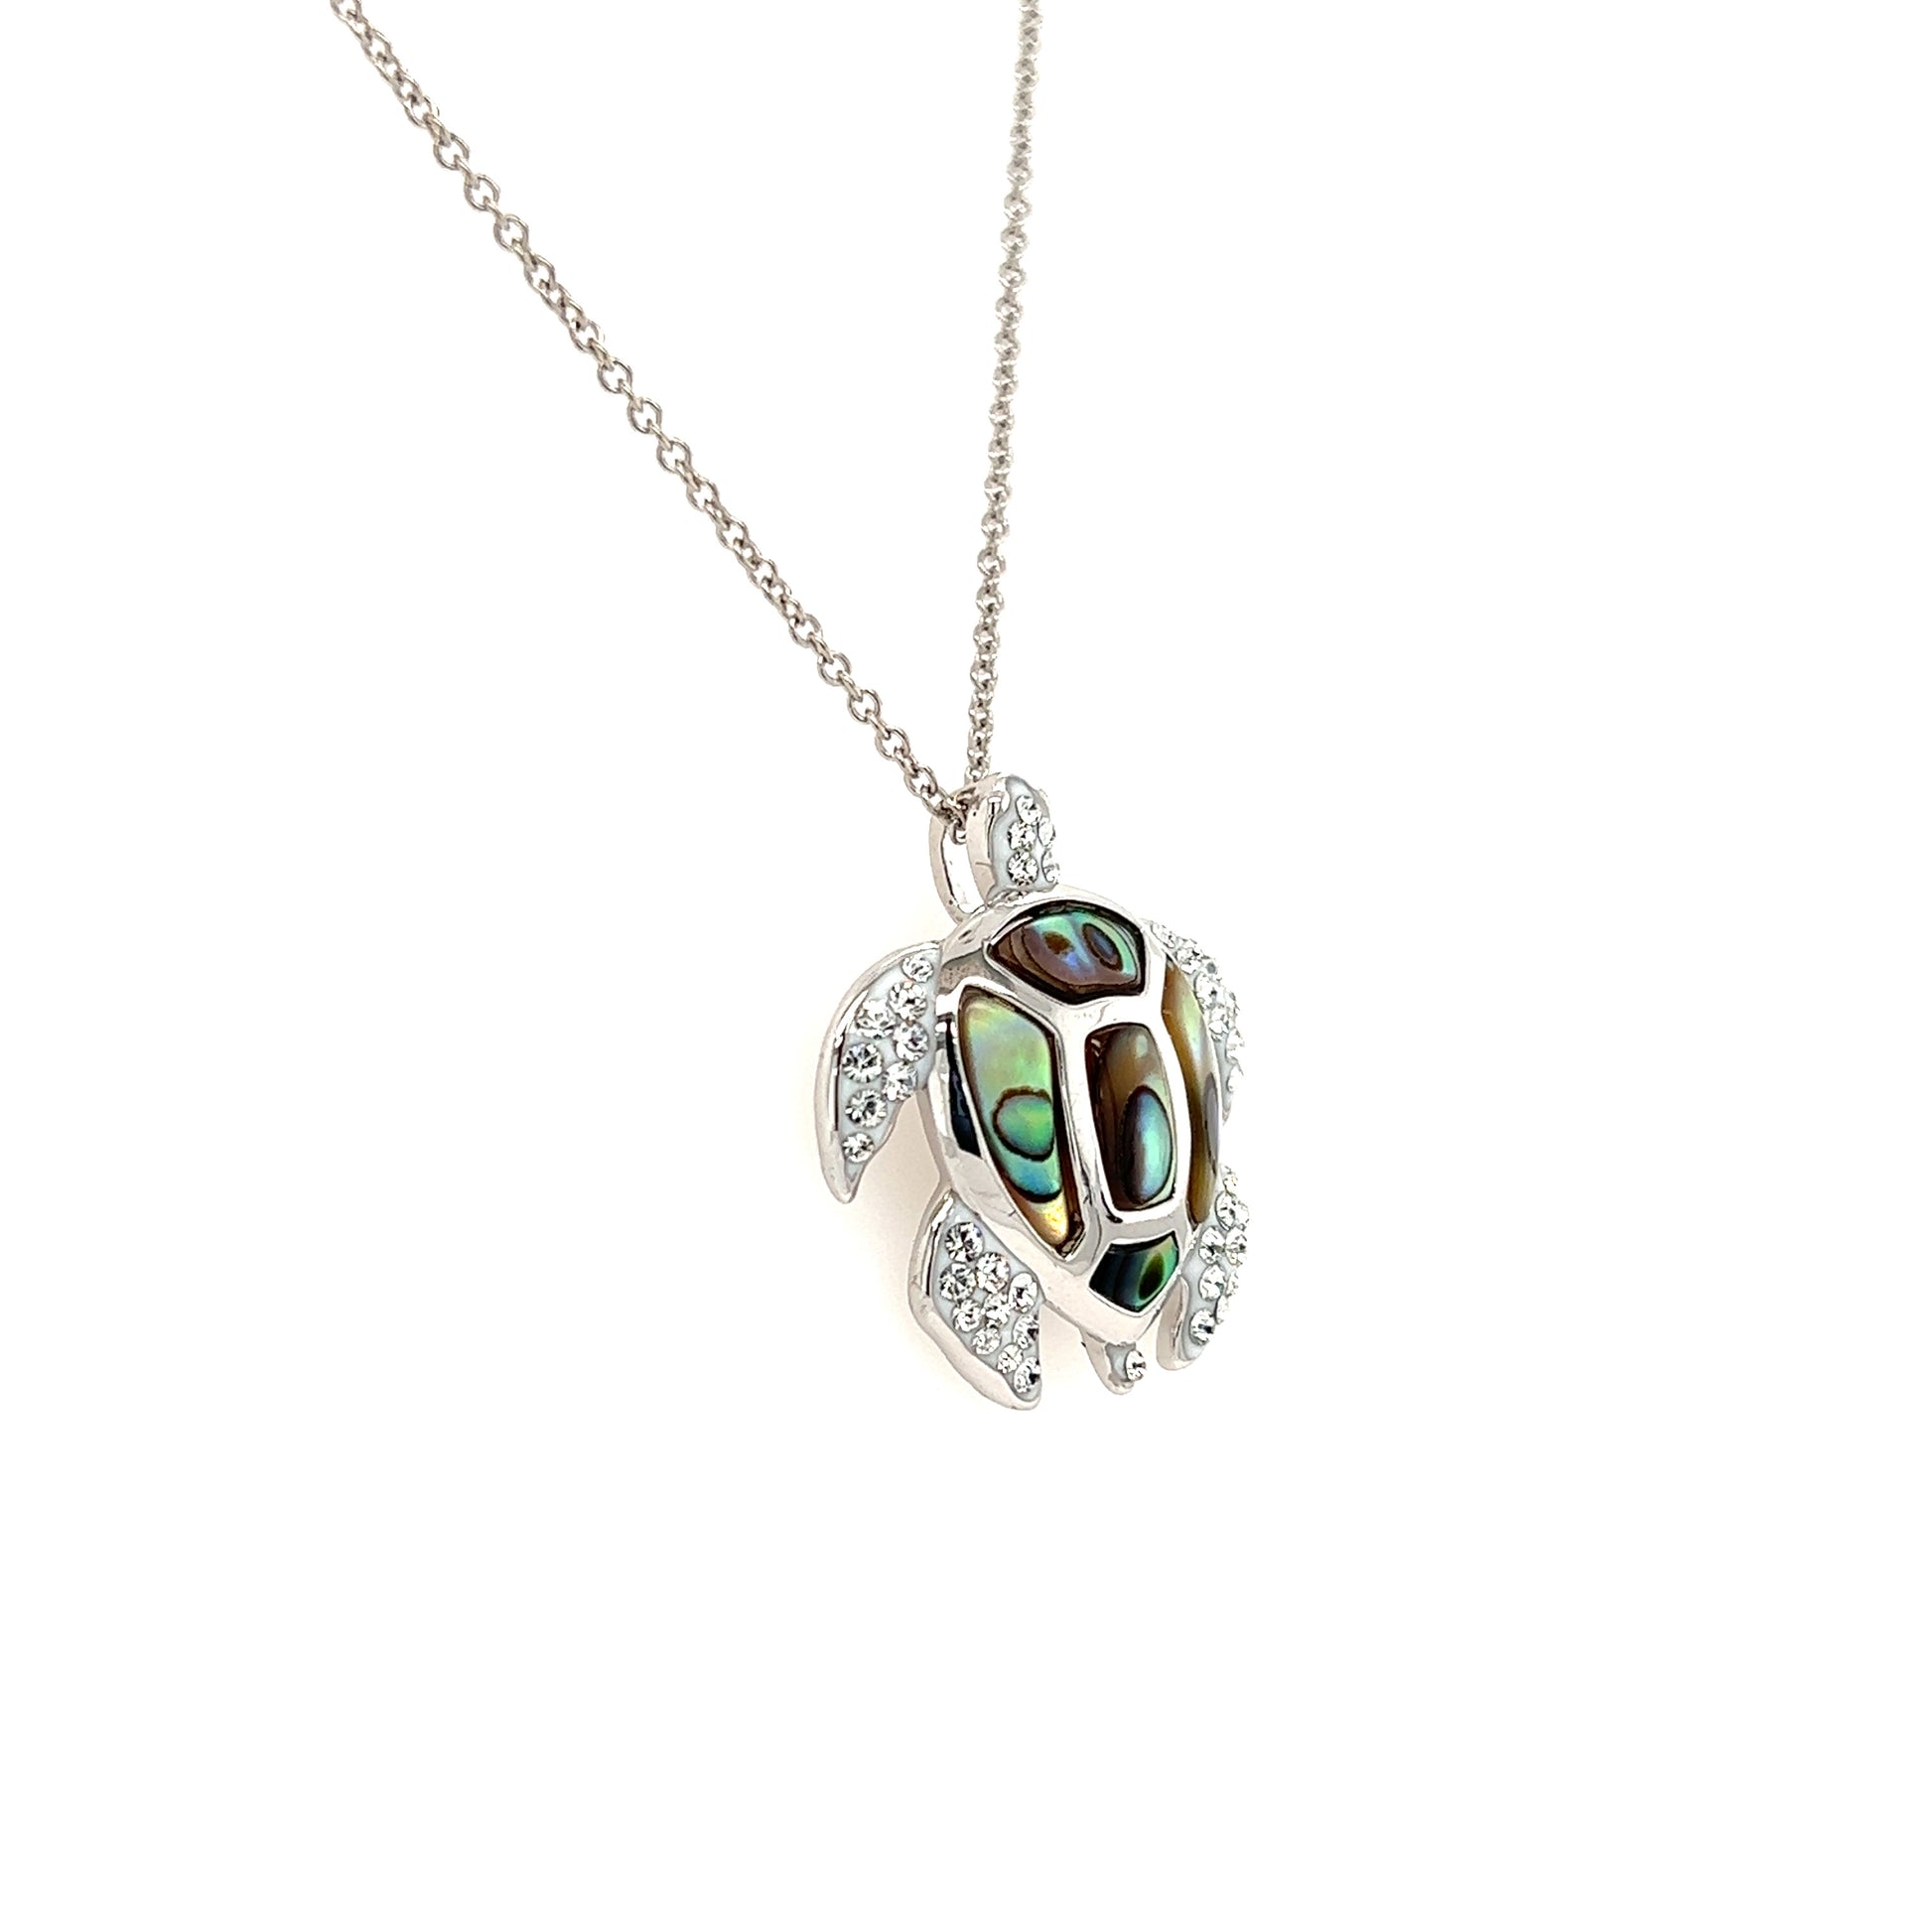 Sea Turtle Necklace with Abalone Shell Accents and White Crystals in Sterling Silver Left Side View